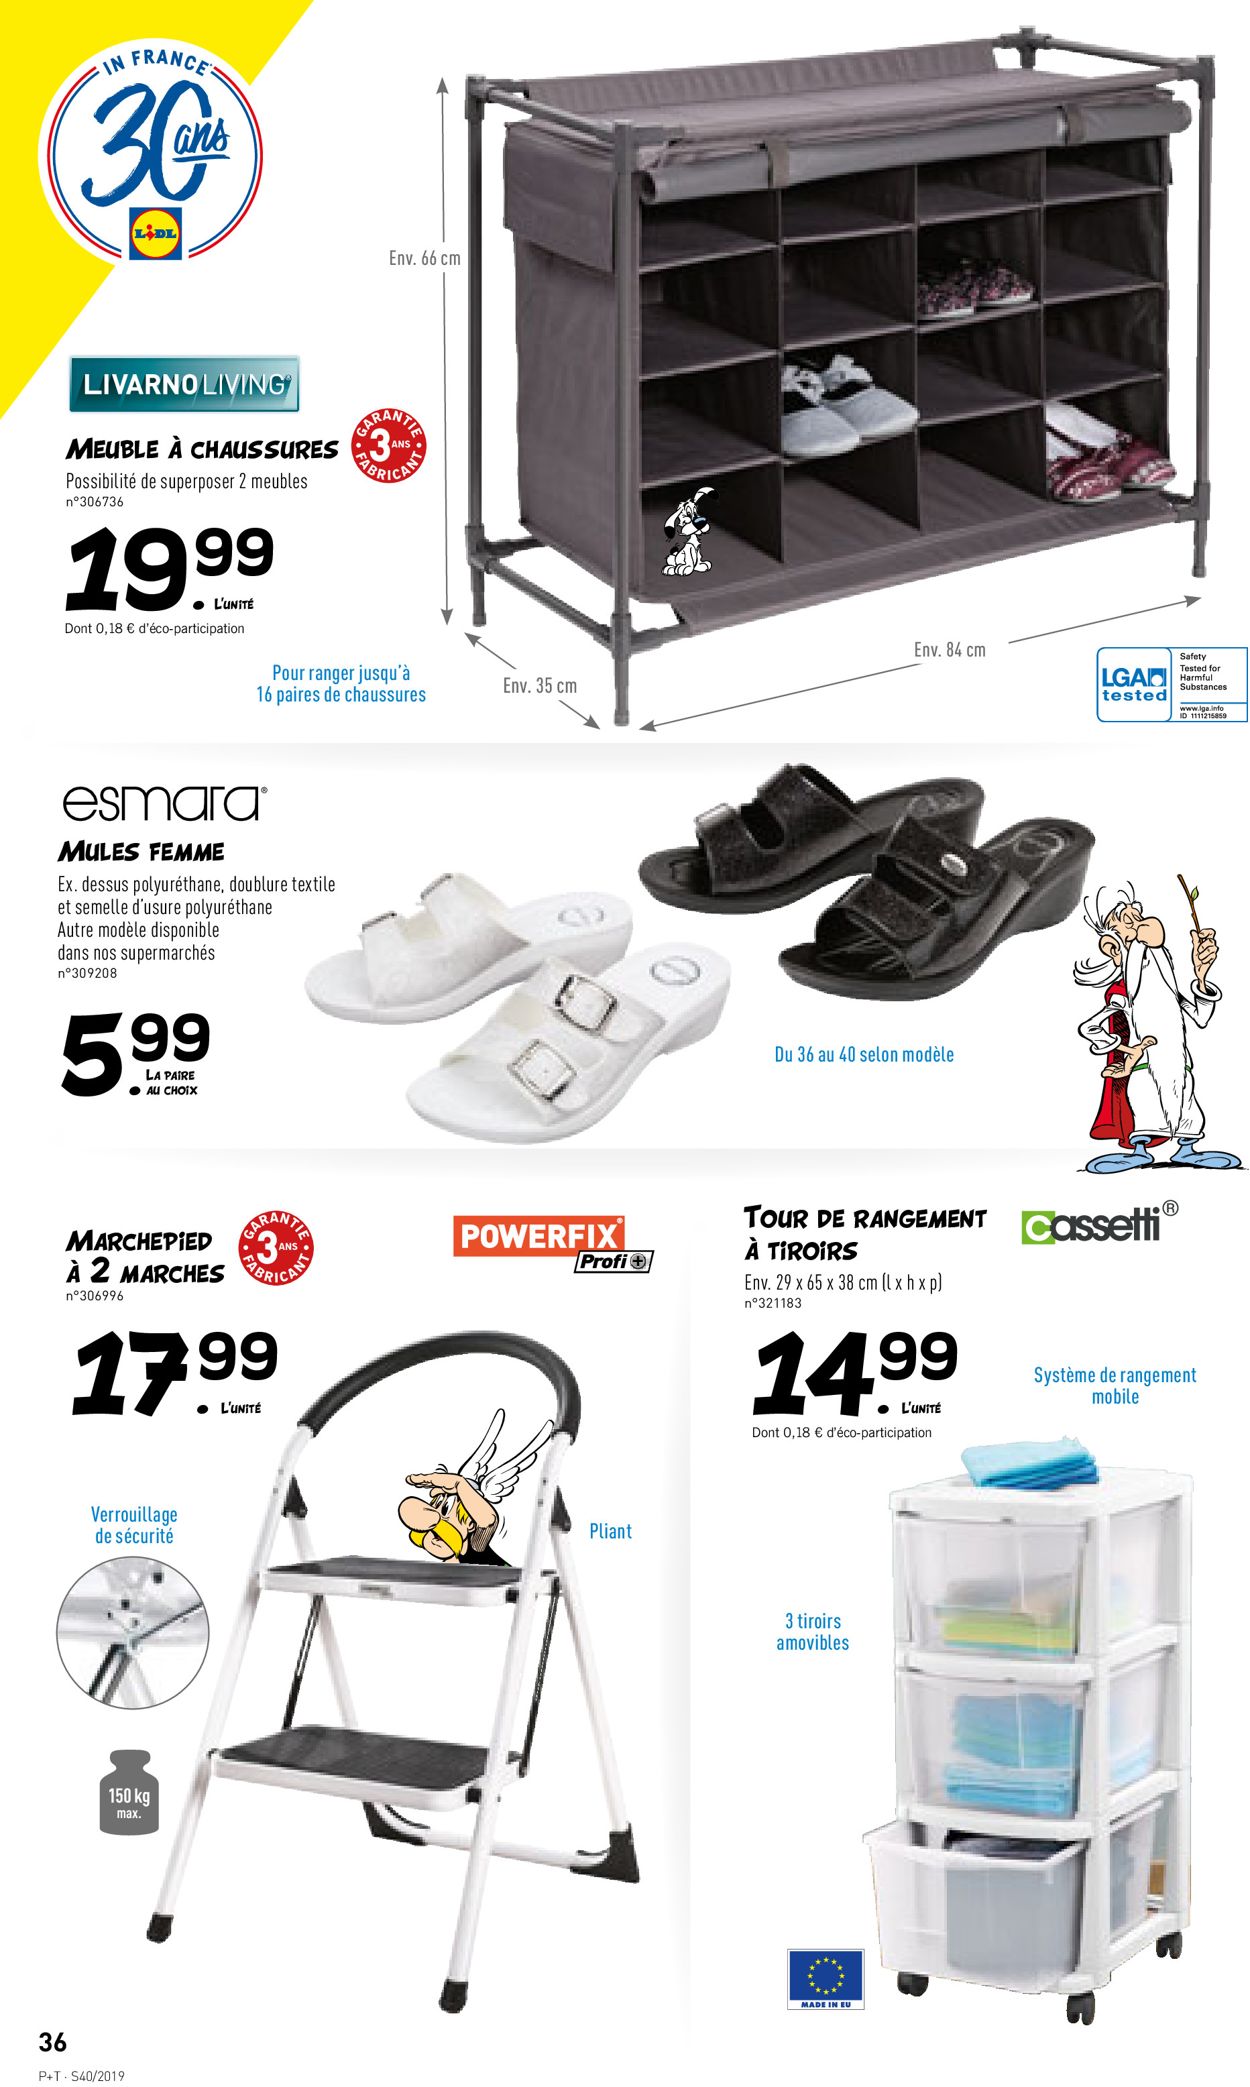 Lidl Catalogue - 02.10-08.10.2019 (Page 36)